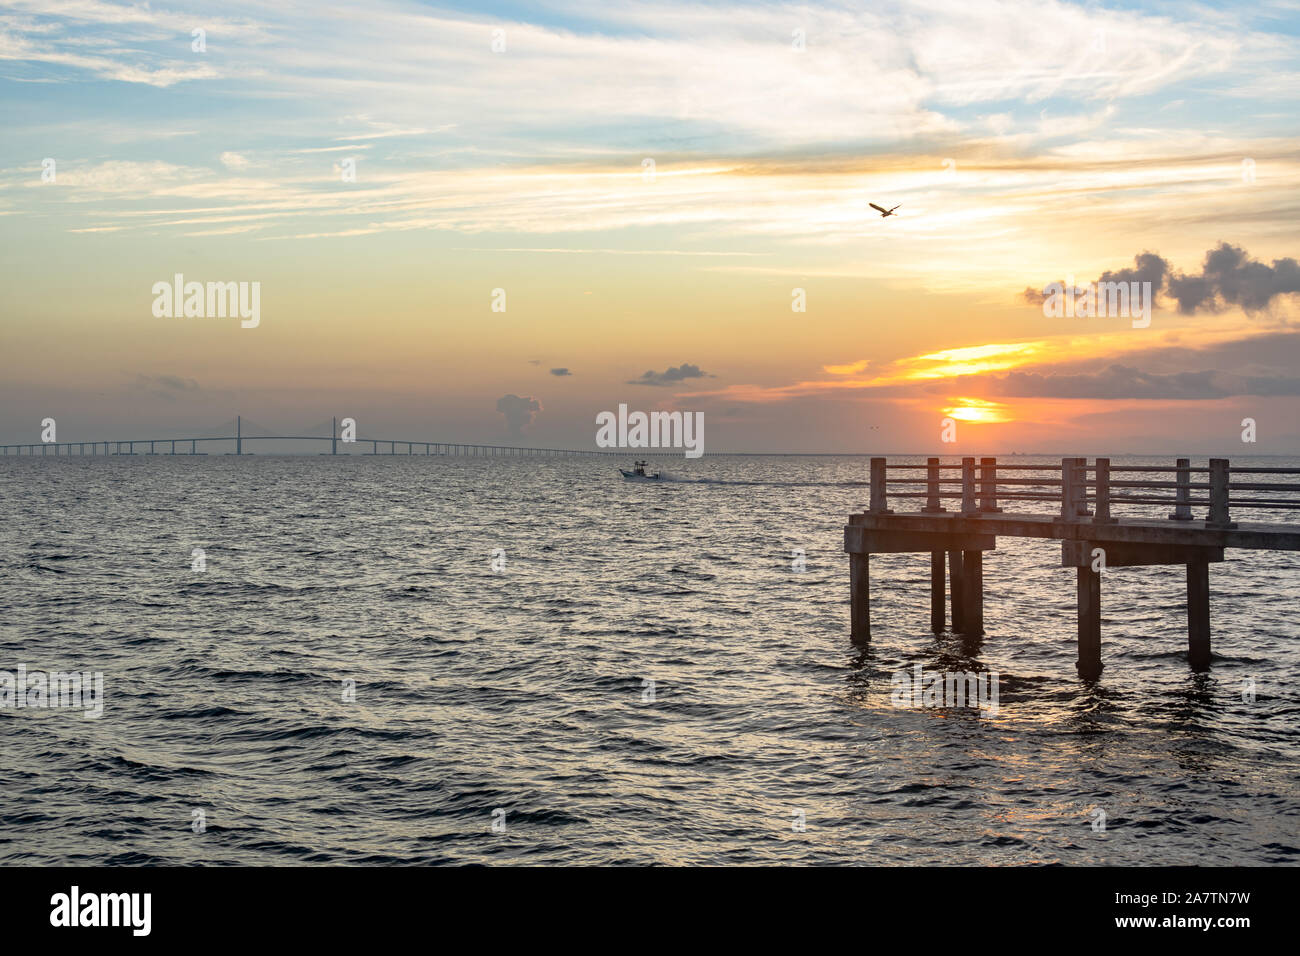 Sunrise view of a bridge and pier in Central Florida Stock Photo